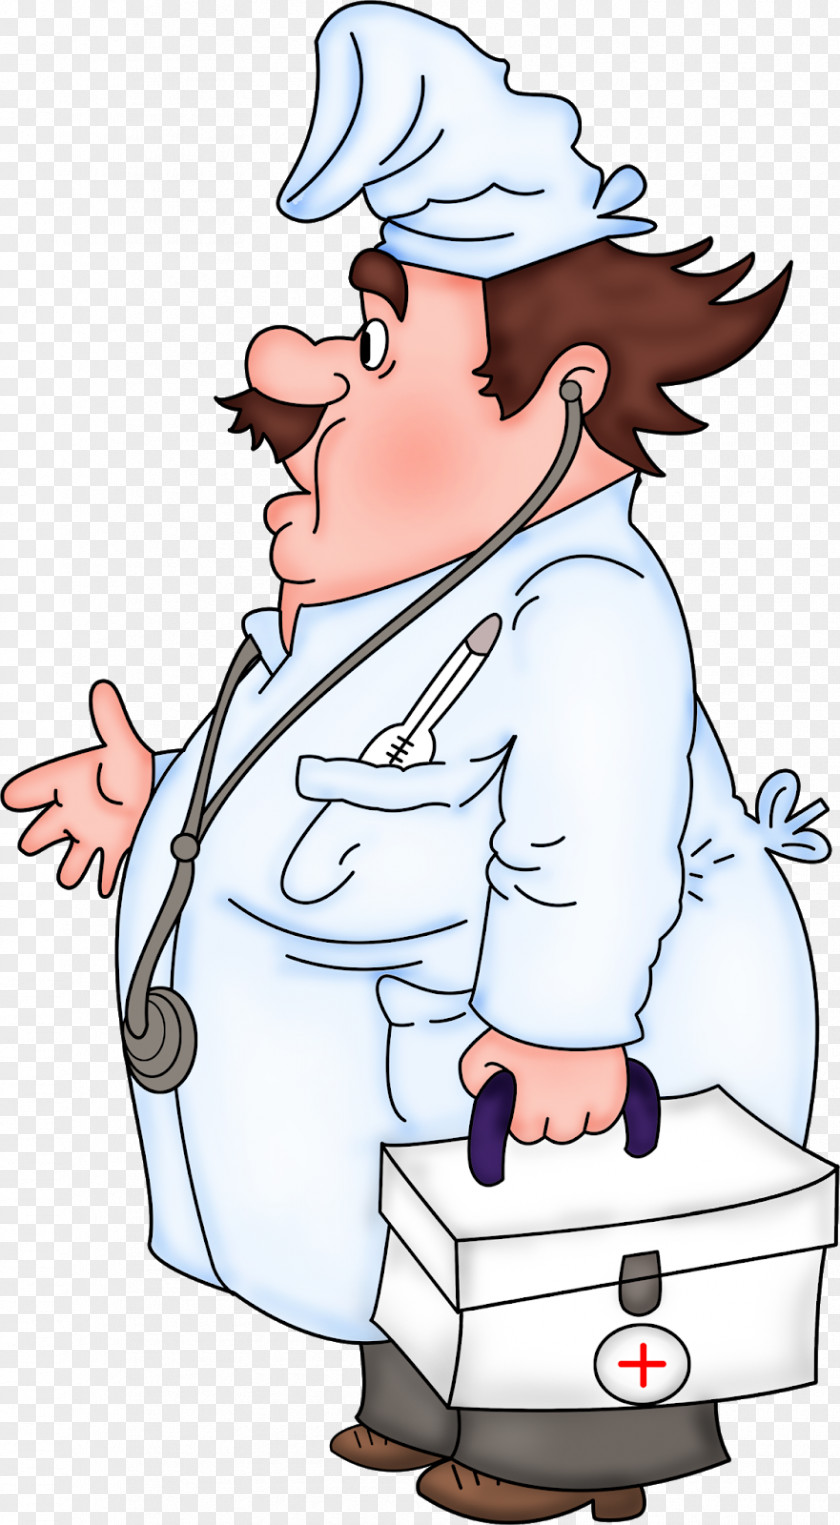 Clip Art Physician File Format Image PNG